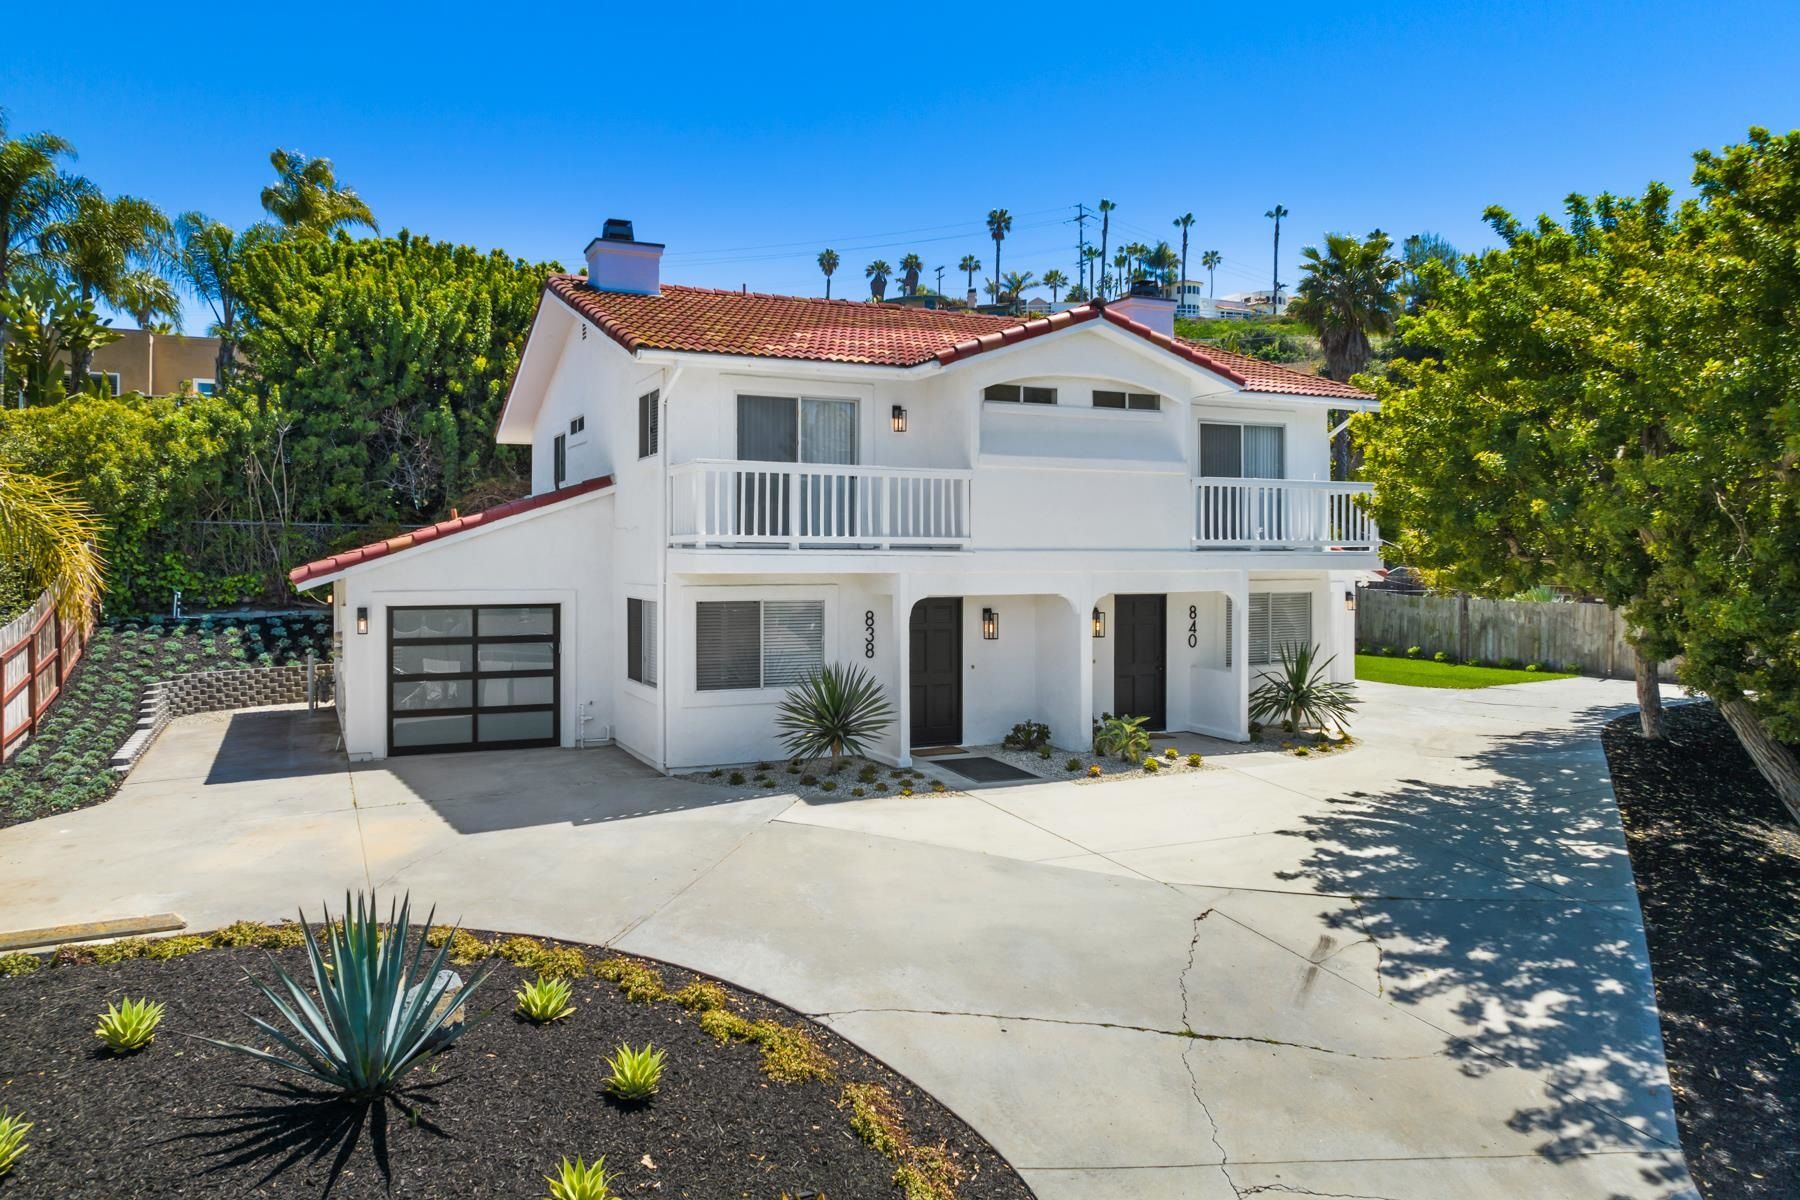 Main Photo: SOLANA BEACH Property for sale: 838-840 Valley Ave